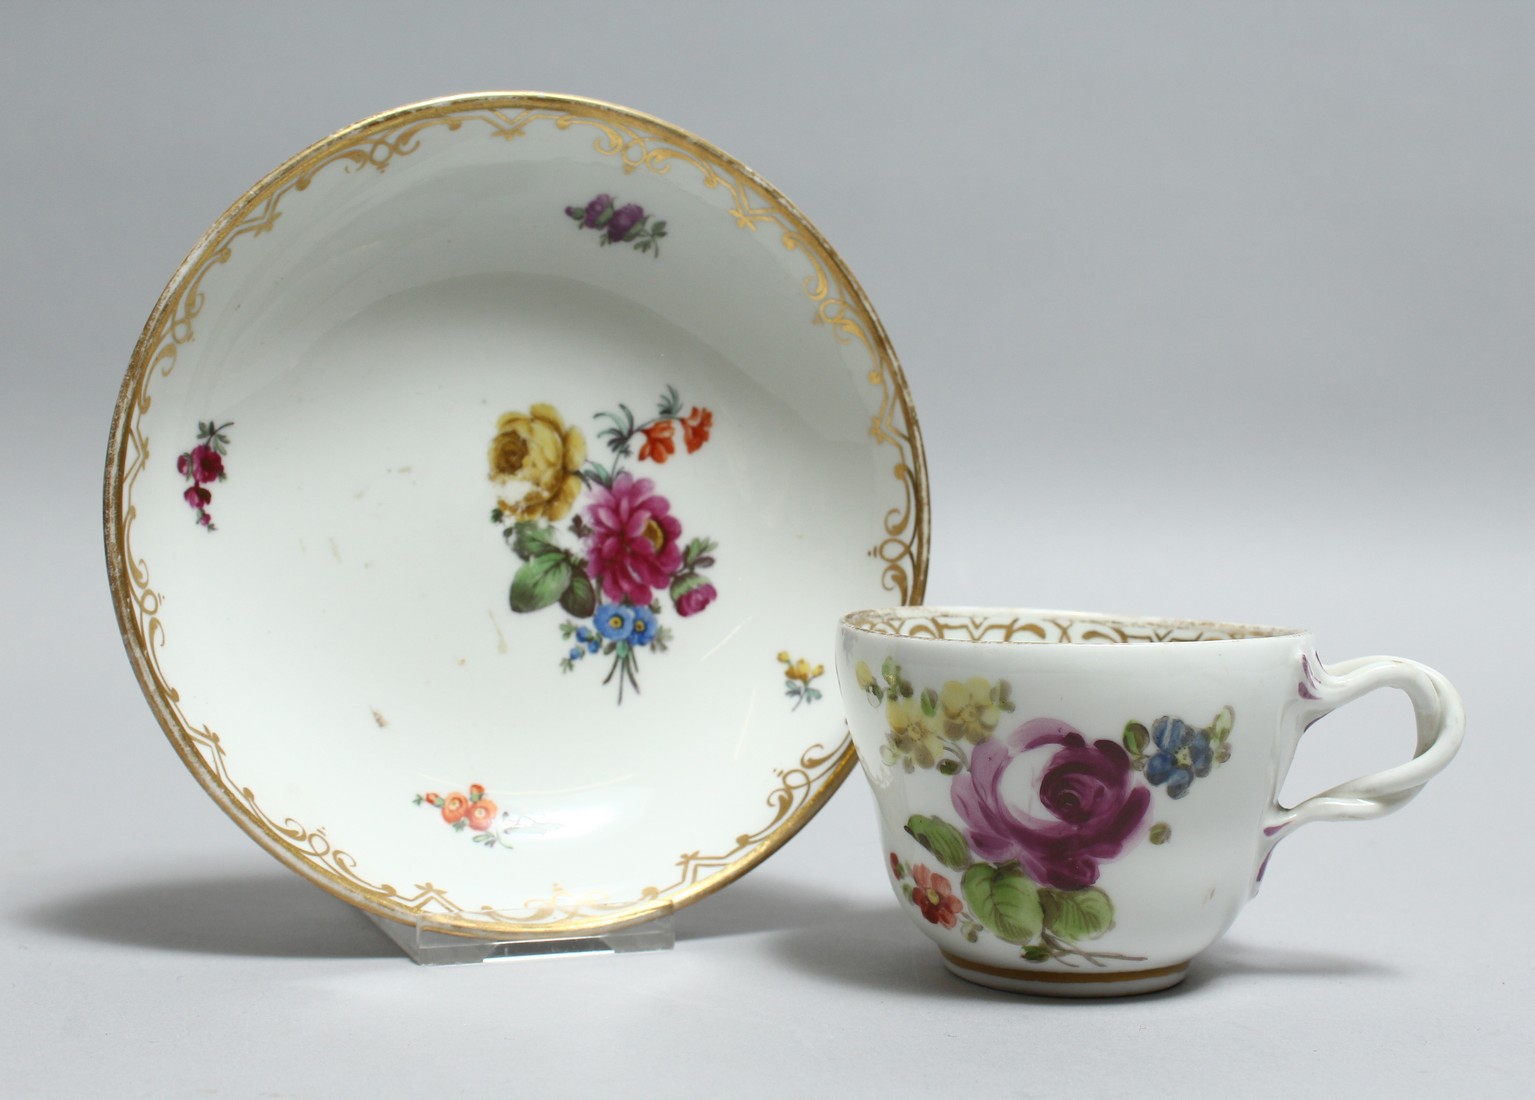 A 19TH CENTURY VIENNA PORCELAIN CUP AND SAUCER painted with flowers. Bee hive mark in blue.